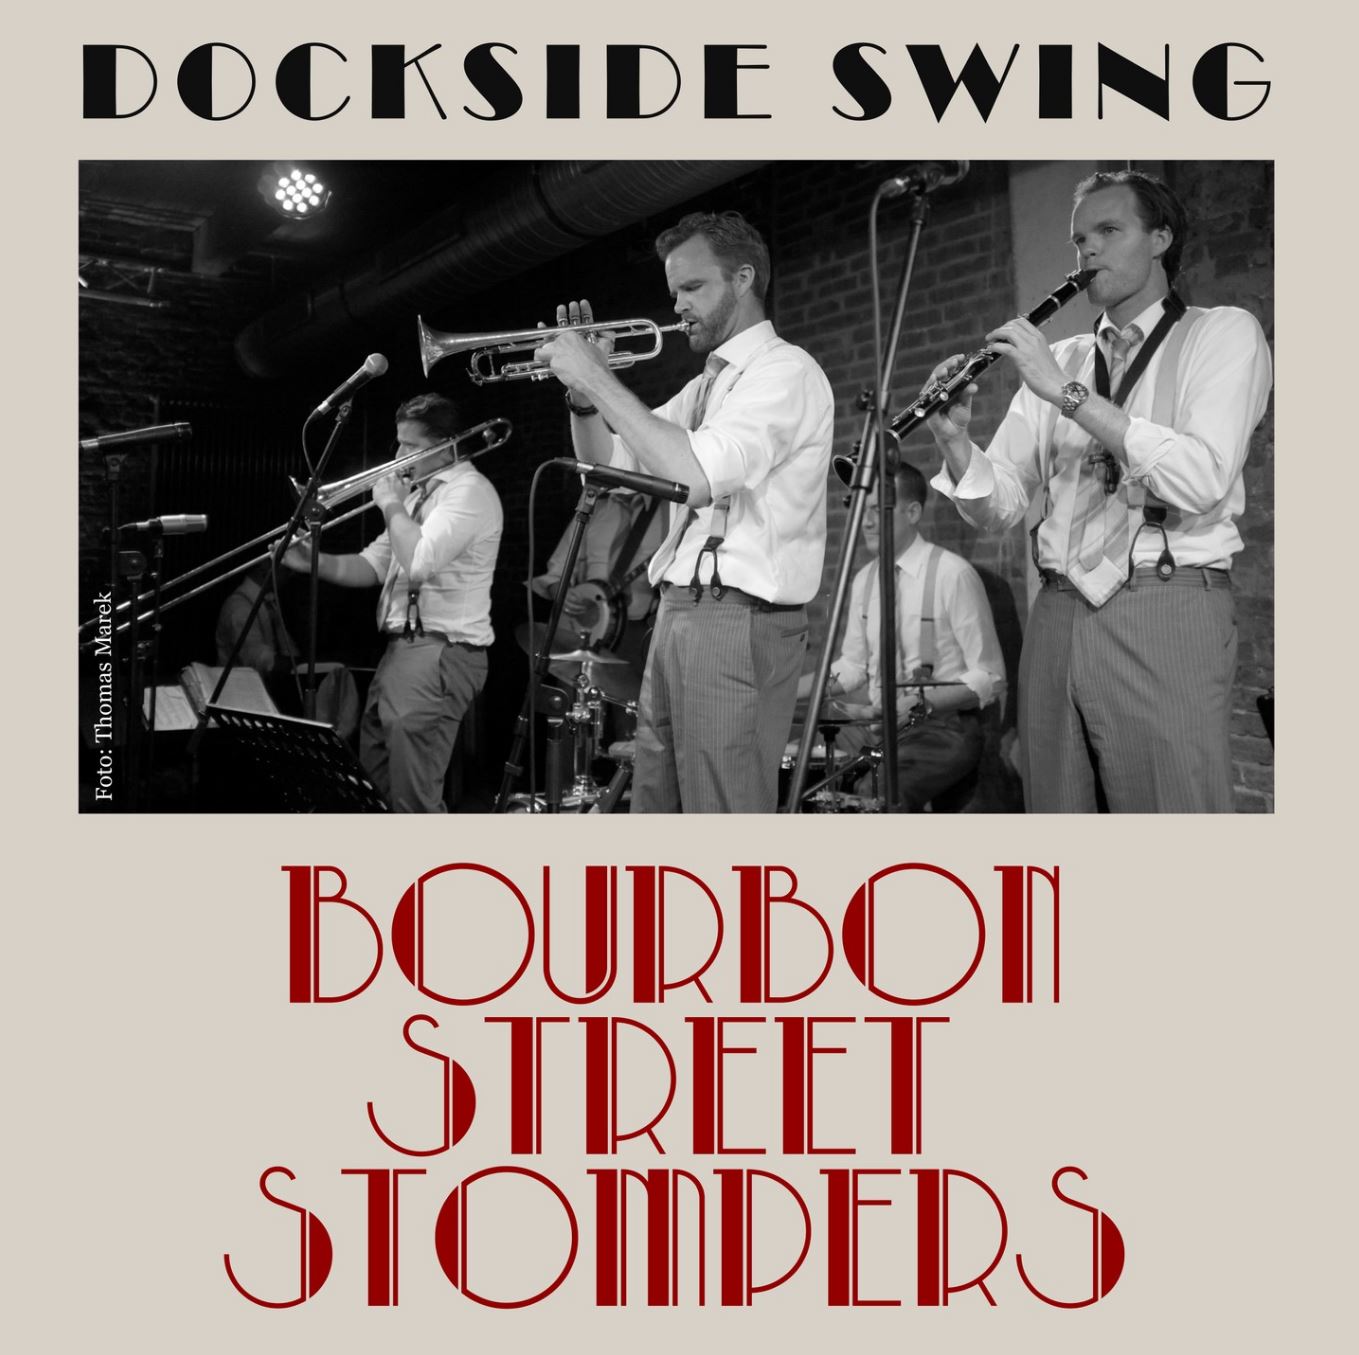 DOCKSIDE SWING - THE BOURBON STREET STOMPERS feat. BETTY BERENT